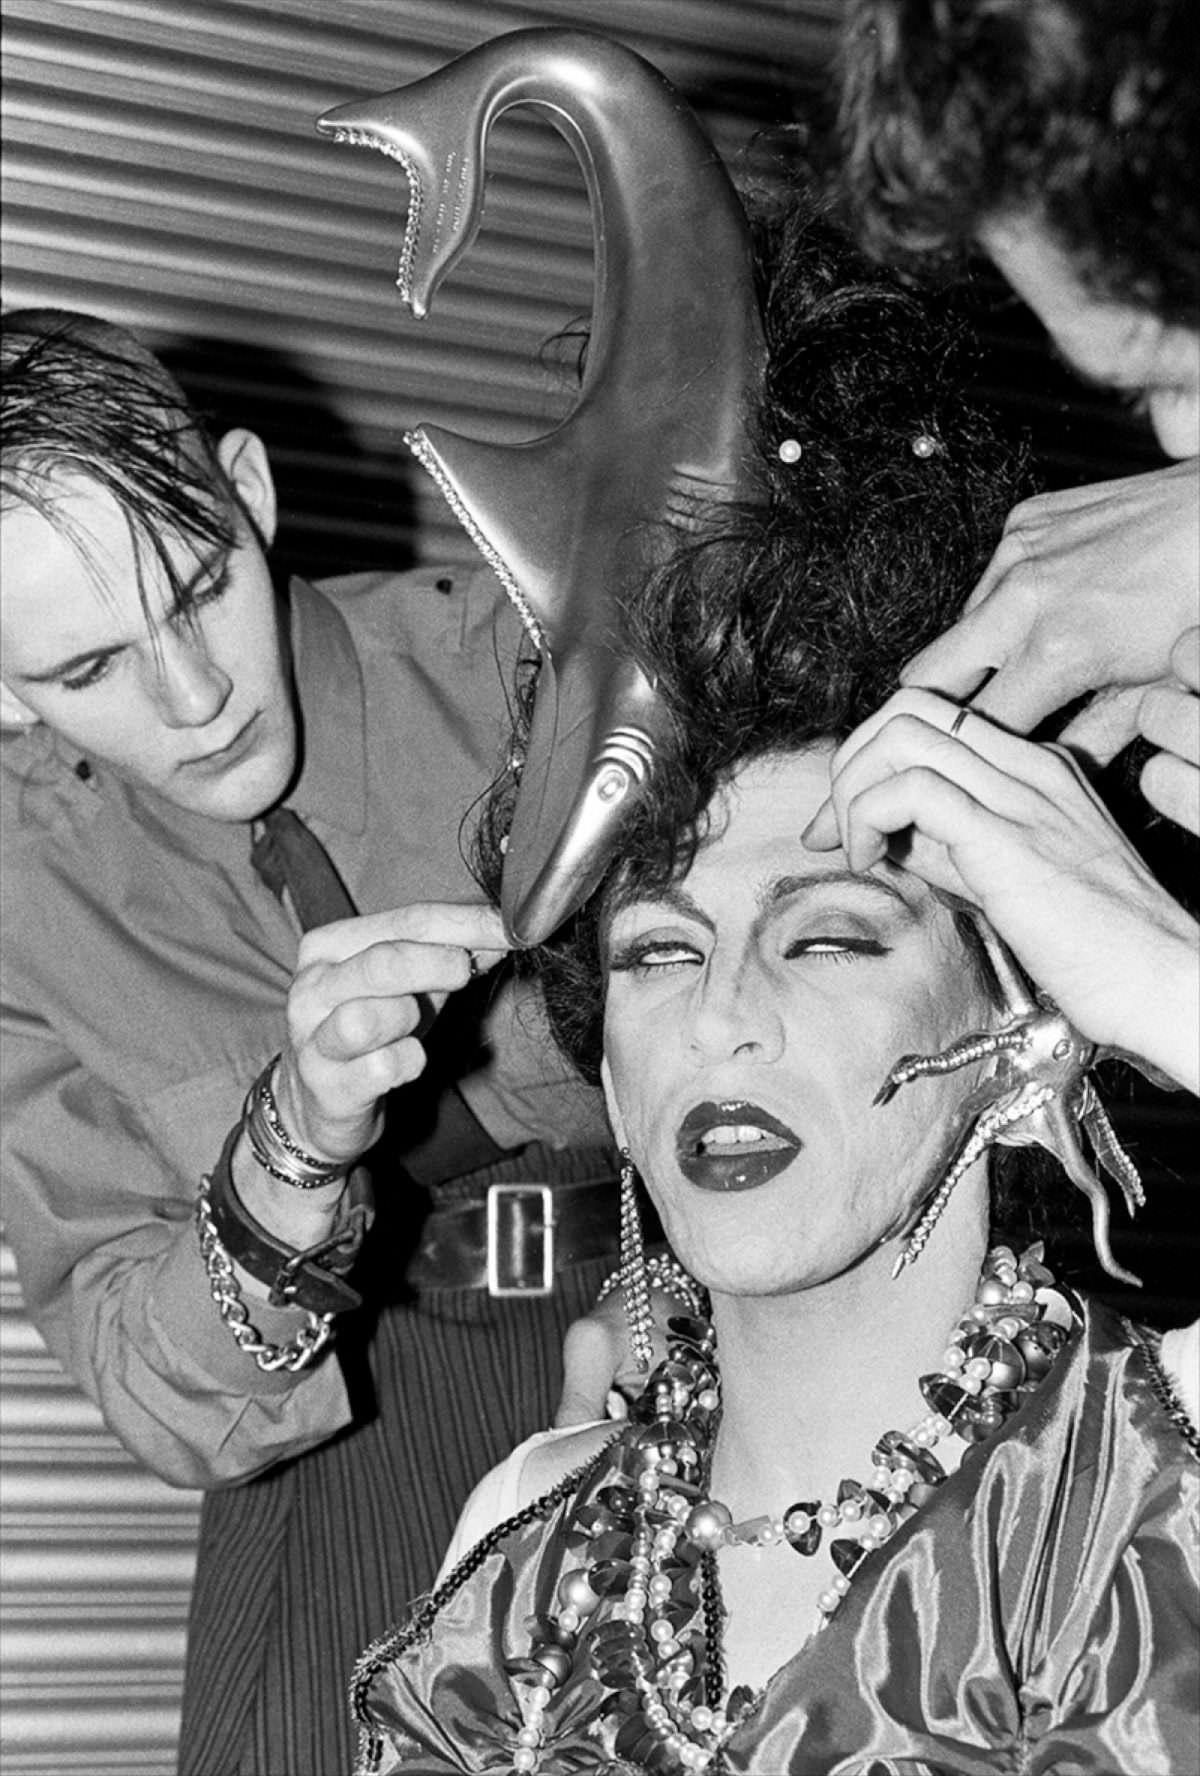 Fashion, Music, and Nights to Remember: A photographic Tour of London's Nightclubs (1979-1981)